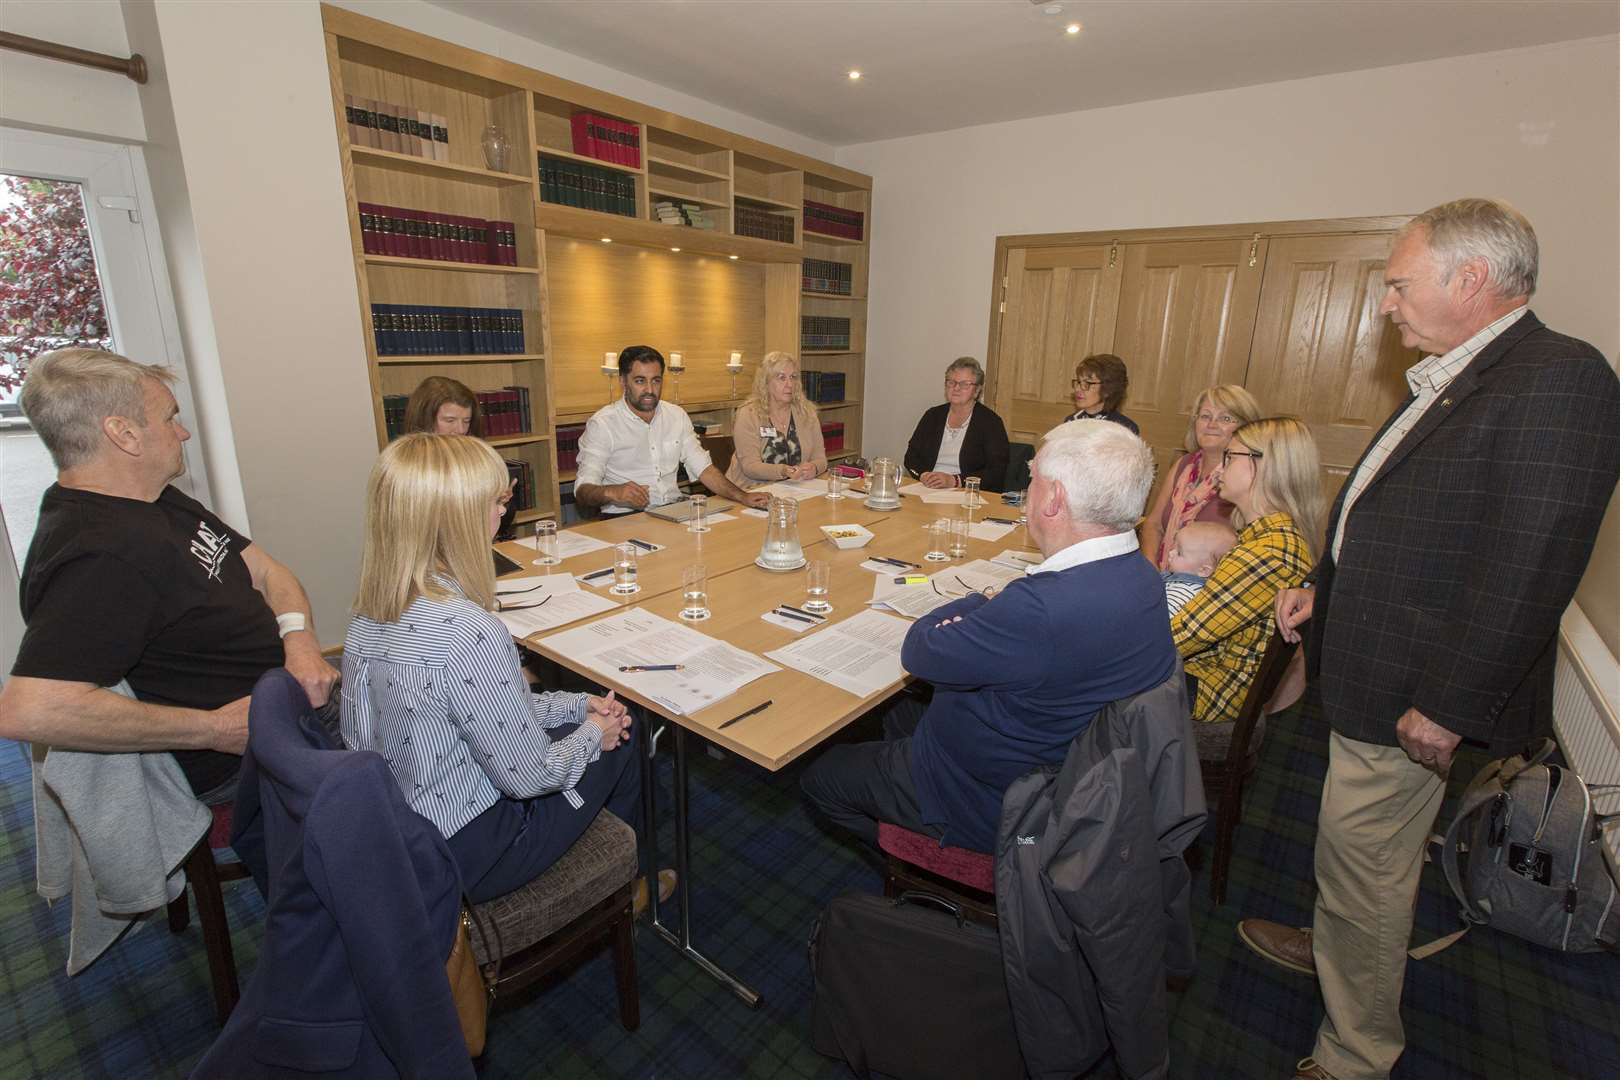 Scotland's health secretary Humza Yousaf meeting Ron Gunn (right) and other members of Caithness Health Action Team in Wick's Norseman Hotel in August. Picture: Robert MacDonald / Northern Studios